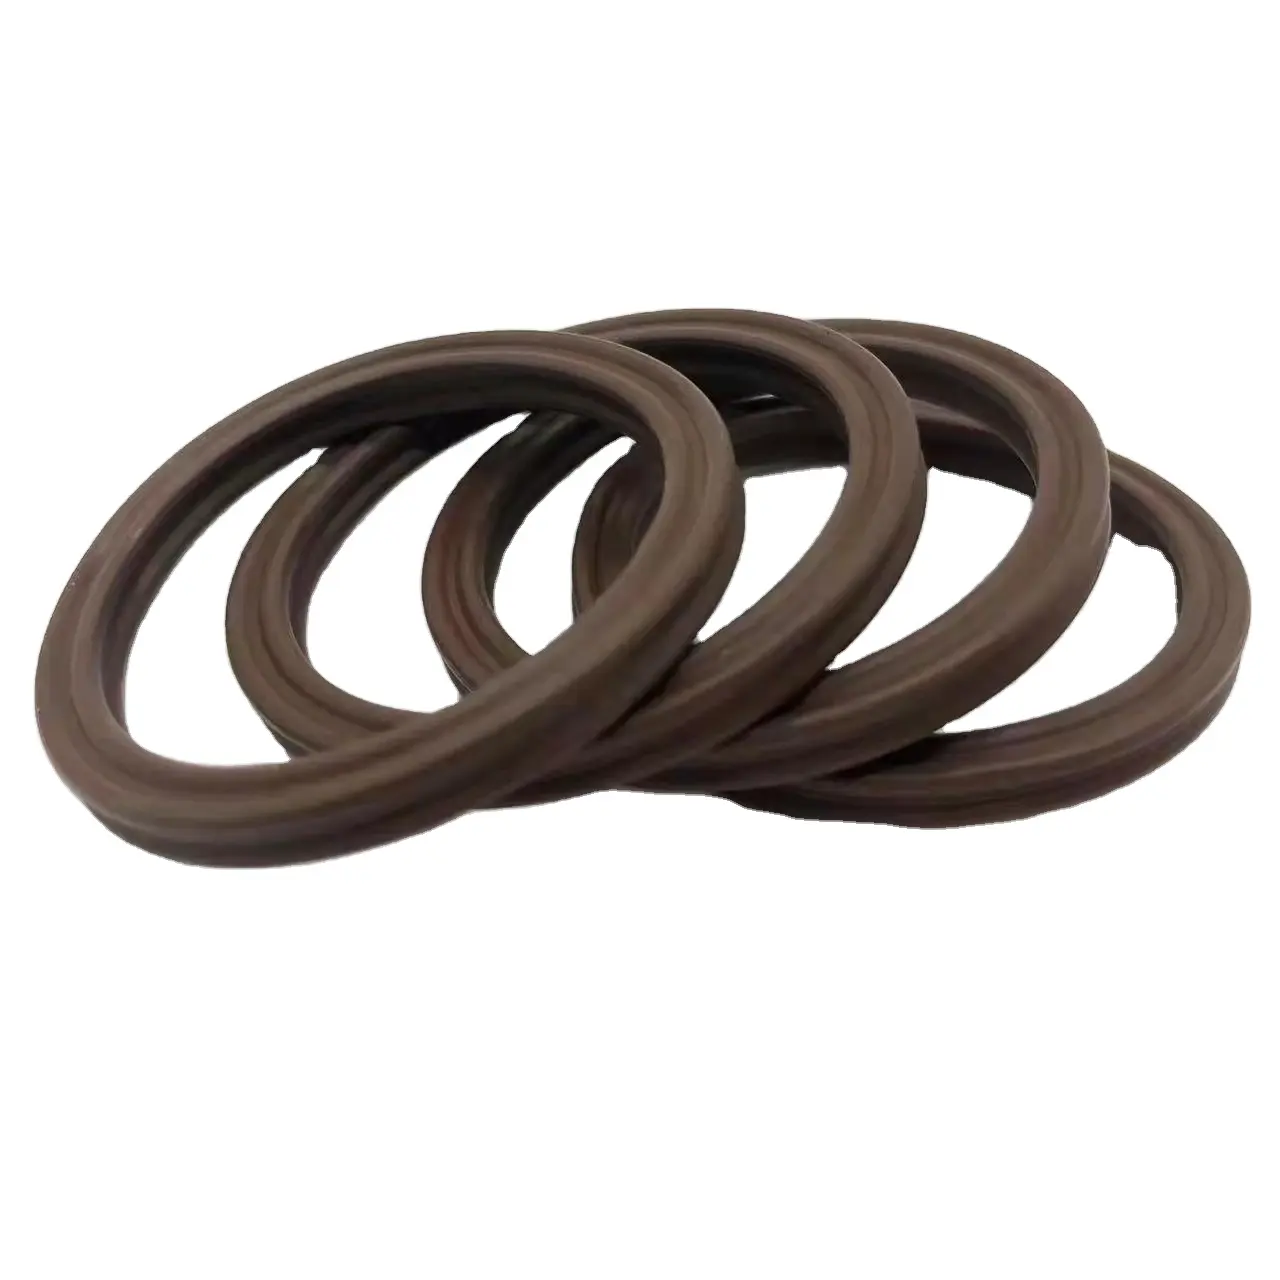 Star ring high temperature resistant fluorine rubber x ring